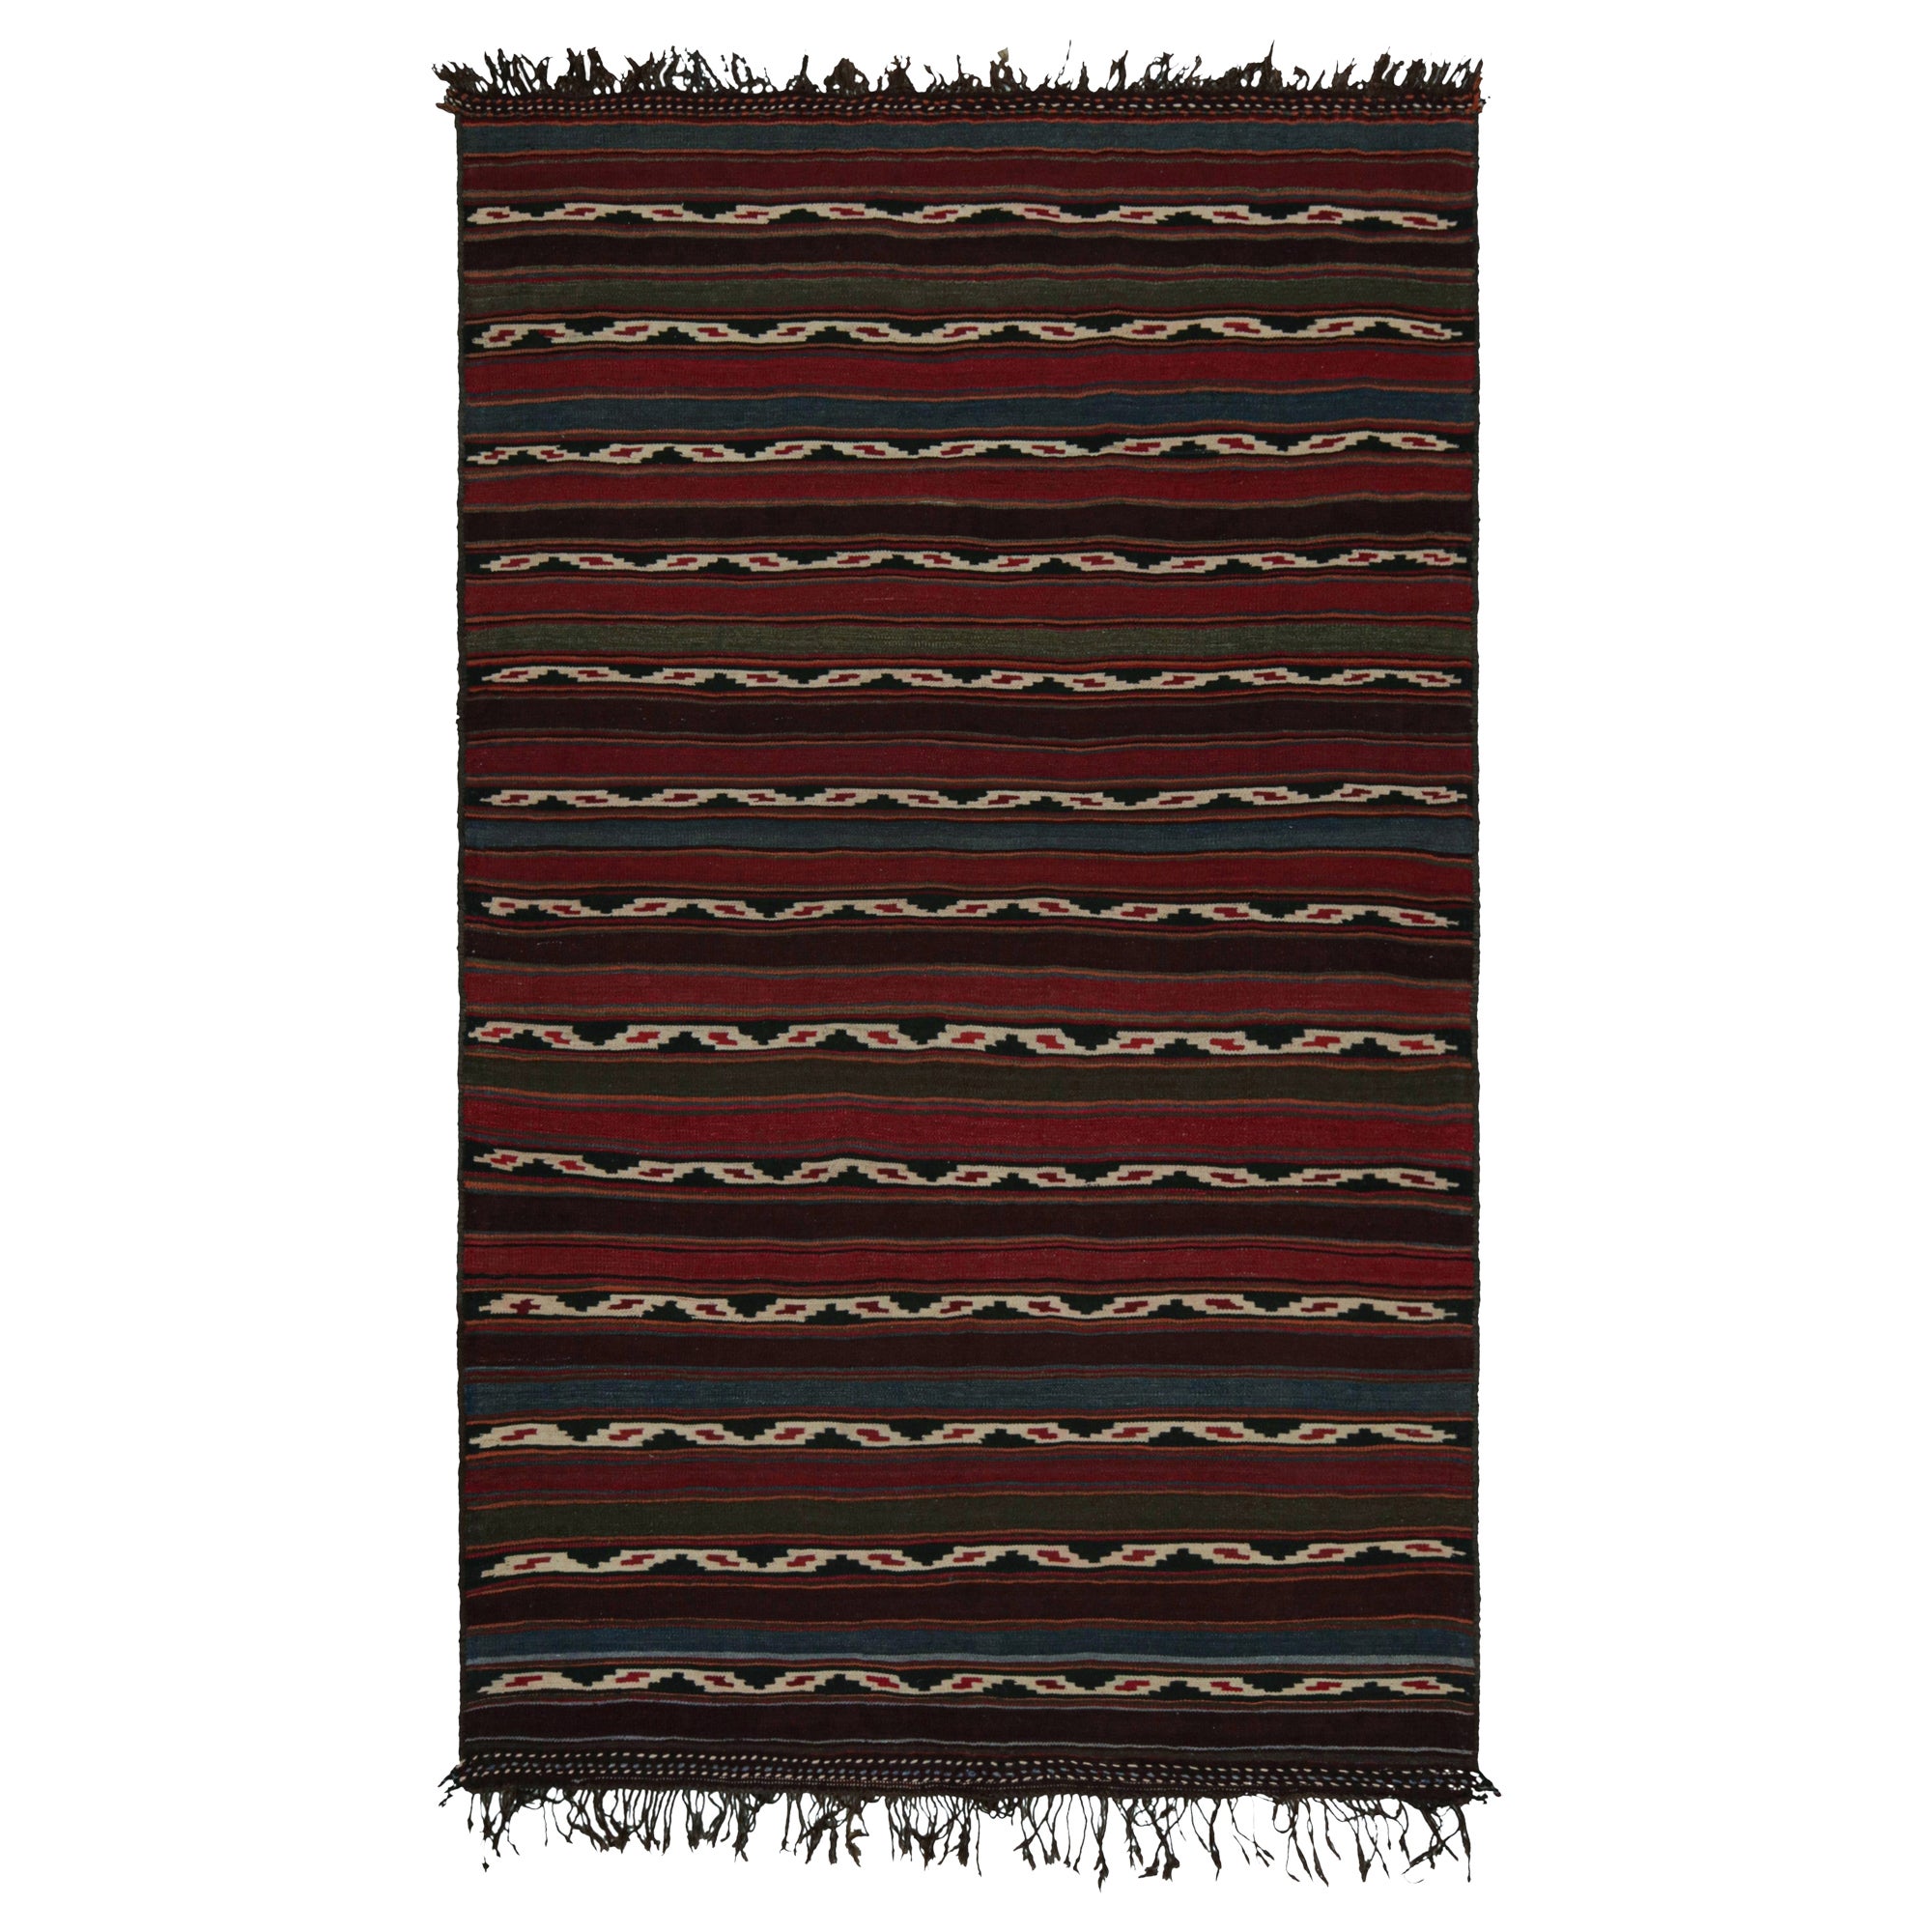 Vintage Afghani tribal Kilim Rug, with Red and Blue Stripes, from Rug & Kilim For Sale